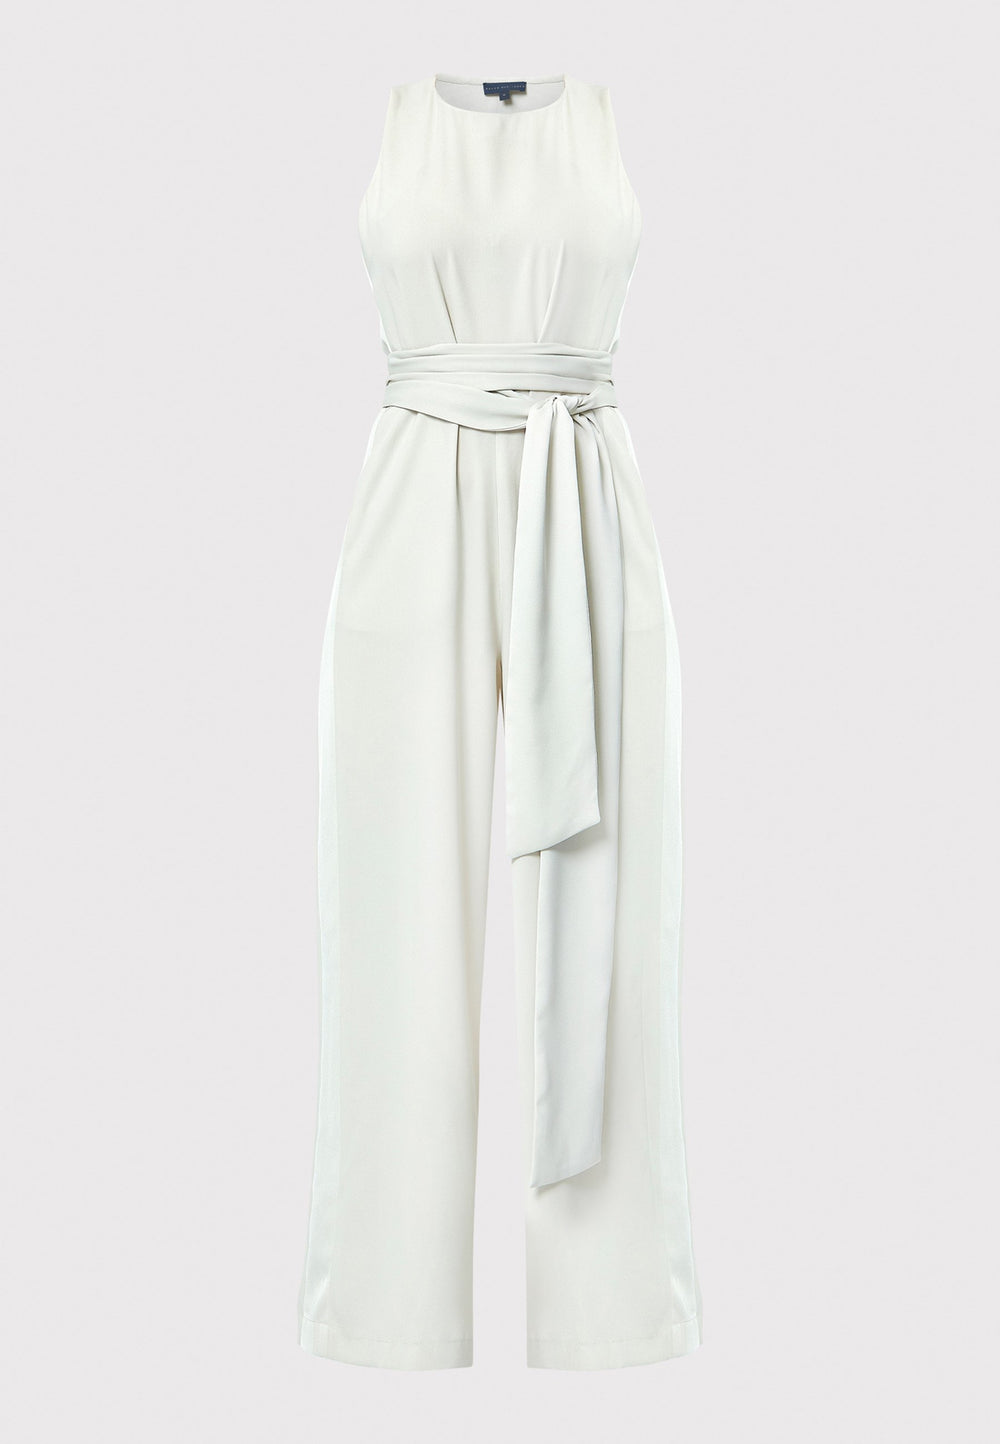 Marie-Claire, a sleeveless stone jumpsuit in fluid satin back crepe. Featuring a wide-leg silhouette and satin stripes on the side seams. It comes with a detachable self-fabric belt that can be used to cinch the waist or worn around the neck. Includes practical side pockets for added convenience. Perfect for relaxed yet sophisticated evening dressing.